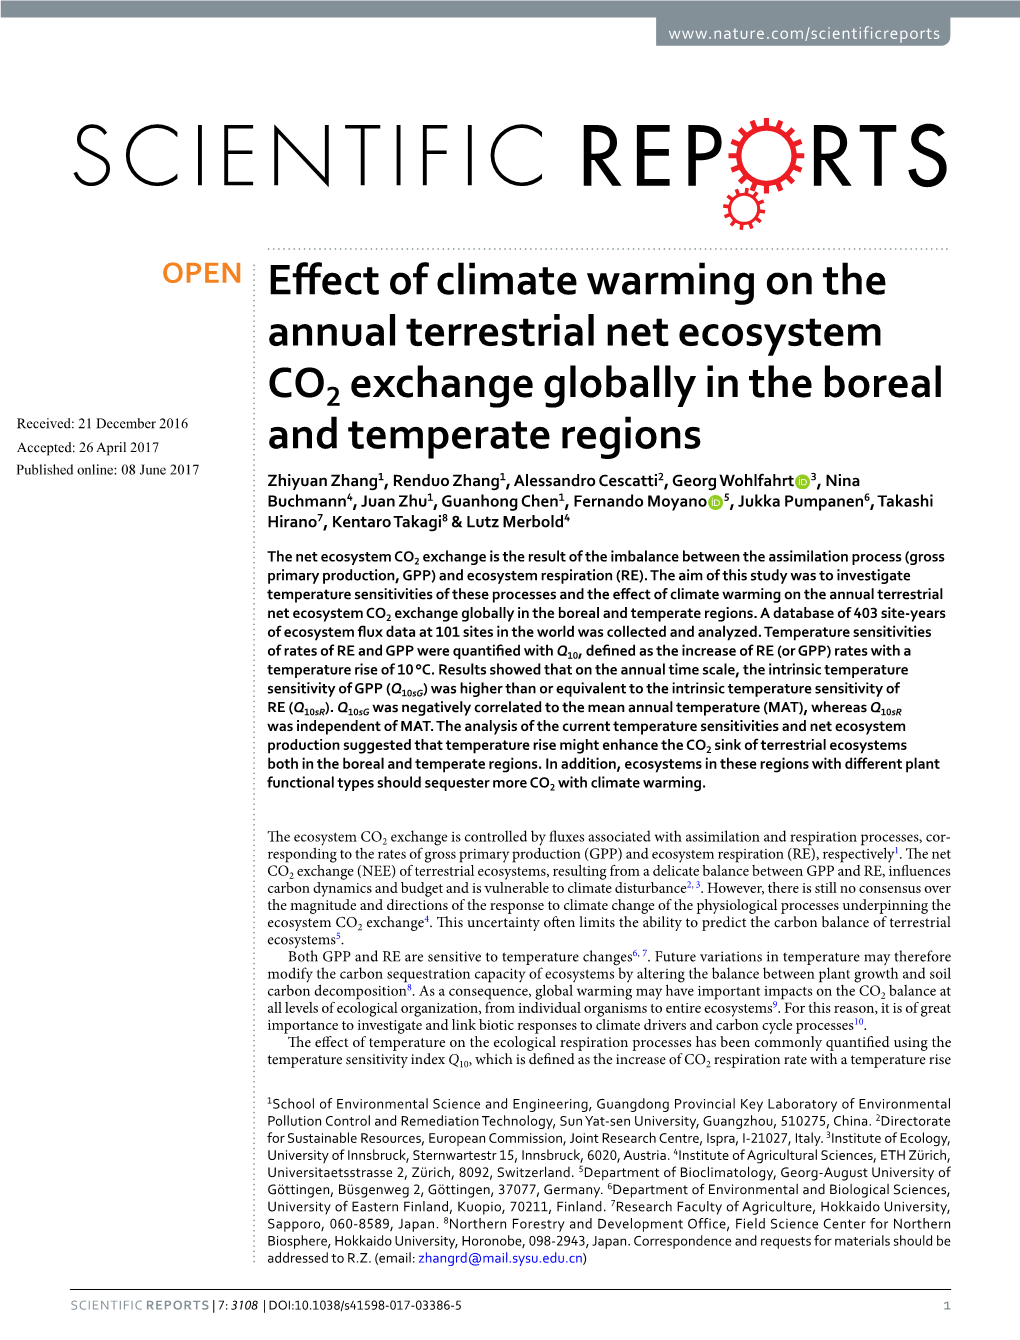 Effect of Climate Warming on the Annual Terrestrial Net Ecosystem CO2 Exchange Globally in the Boreal and Temperate Regions